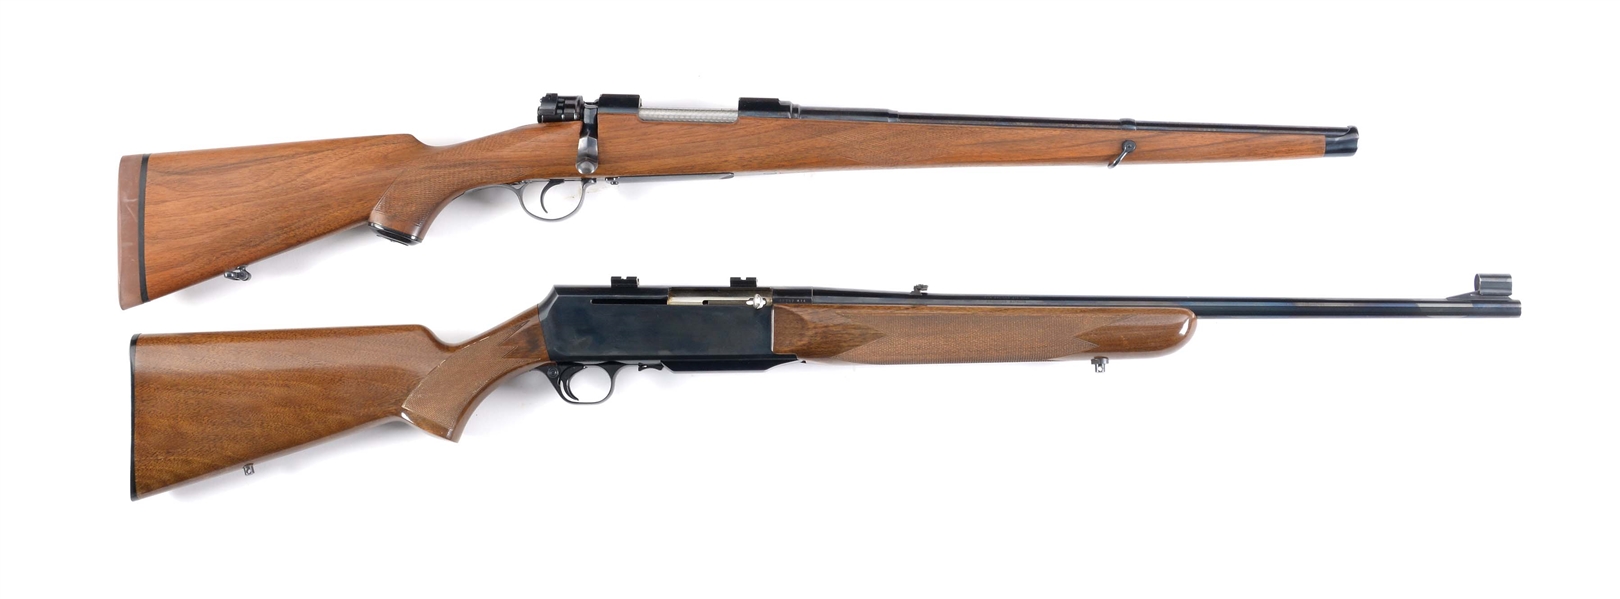 (M) LOT OF TWO: BRNO MODEL 21 7MM MAUSER BOLT ACTION RIFLE AND BROWNING BAR GRADE 1 .270 SEMI AUTOMATIC RIFLE